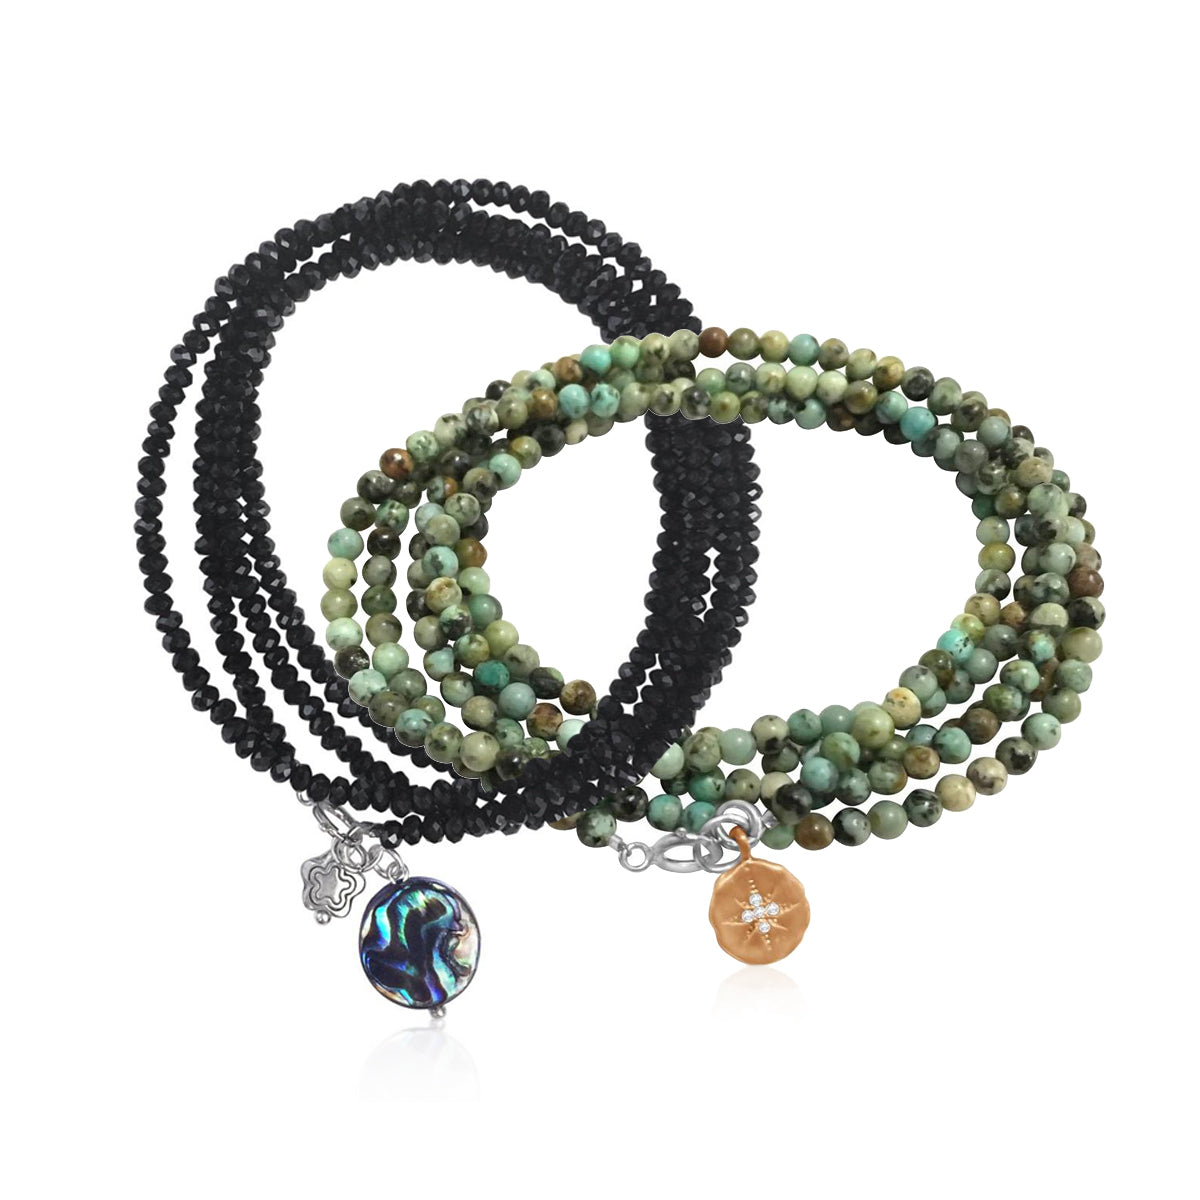 Enjoy the Journey and Ocean Beauty Wrap Bracelet with Abalone -Travel Jewelry Combo